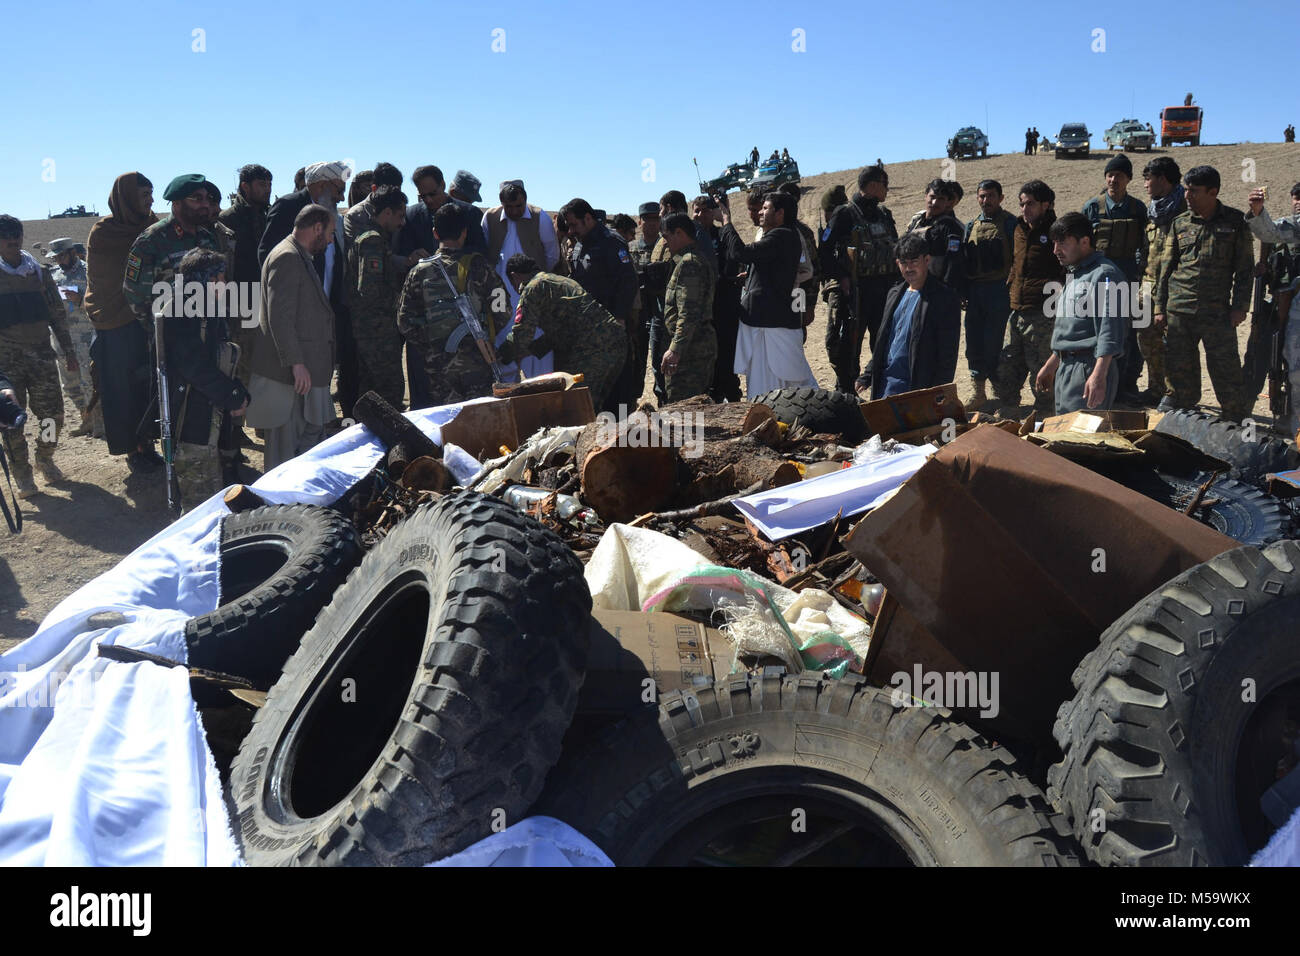 Zabul. 21st Feb, 2018. Afghan security force members and local officials stand beside seized drugs in Qalat, capital of Zabul province, Afghanistan. Afghan authorities have burned over 3 tons of seized narcotic drugs in southern province of Zabul, the provincial governor said on Wednesday. Credit: Arghand/Xinhua/Alamy Live News Stock Photo